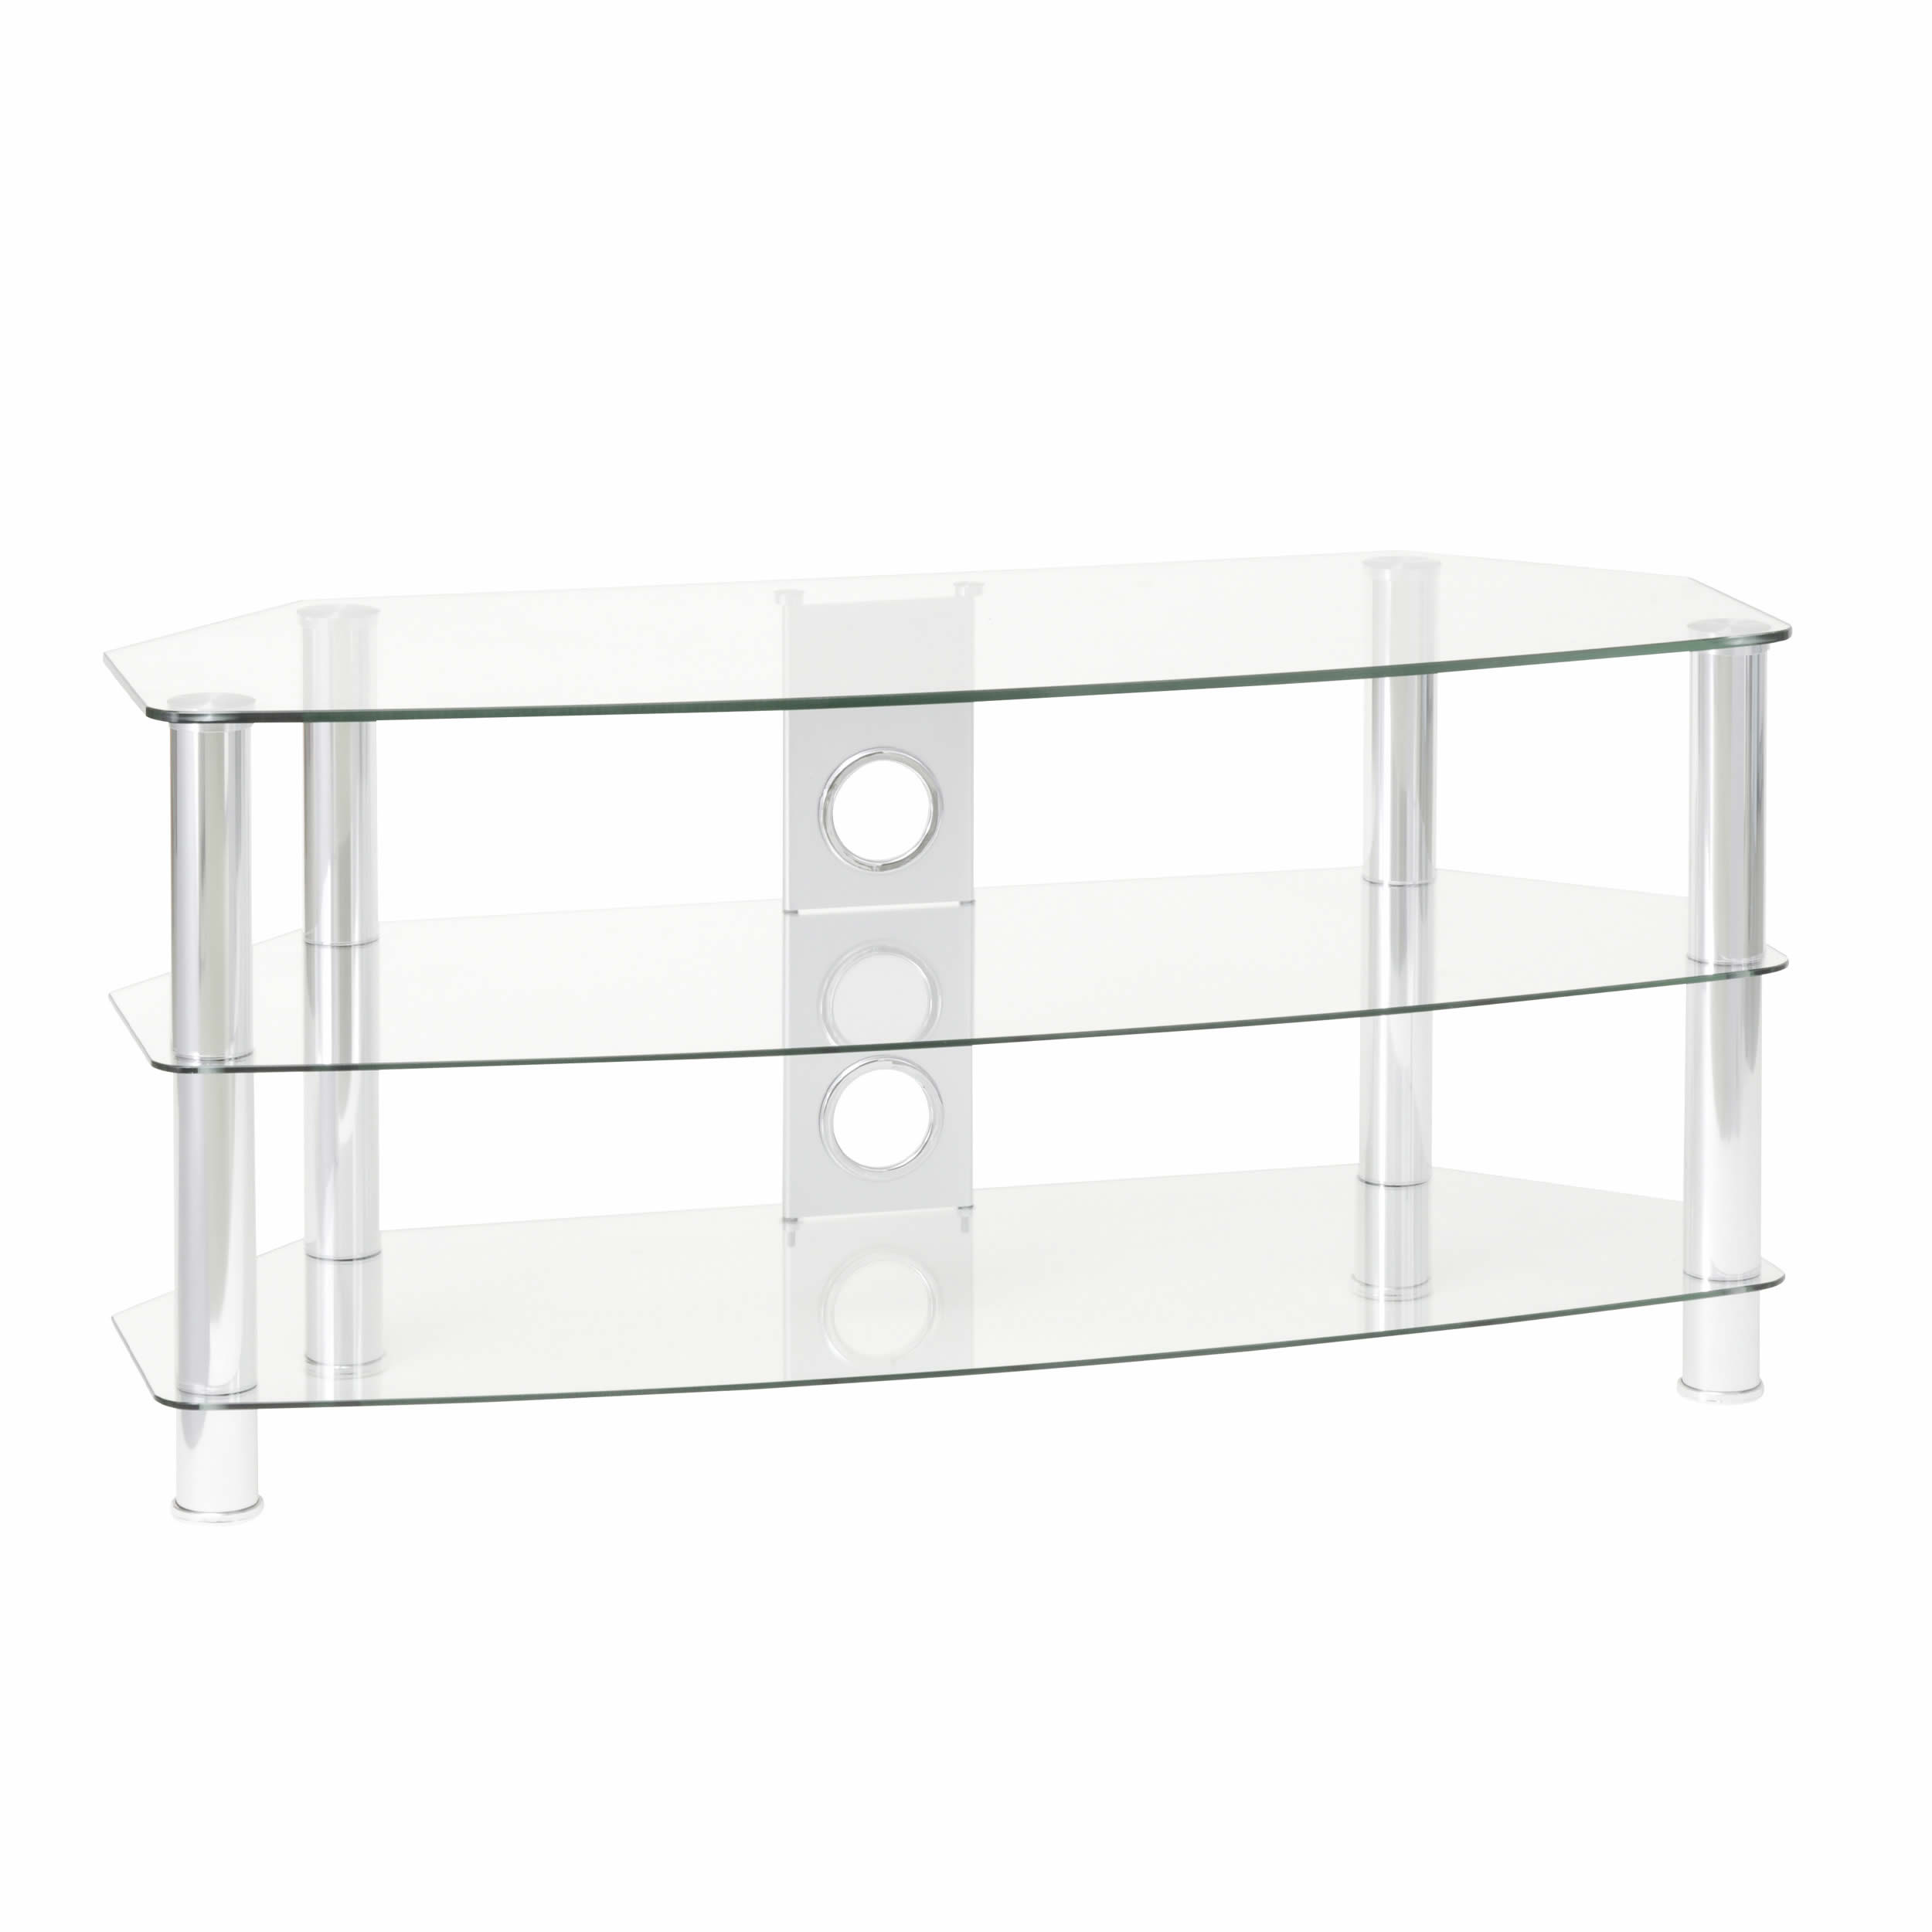 TTAP 1050mm TV Stand Upto 55inch Clear Glass Chrome Legs